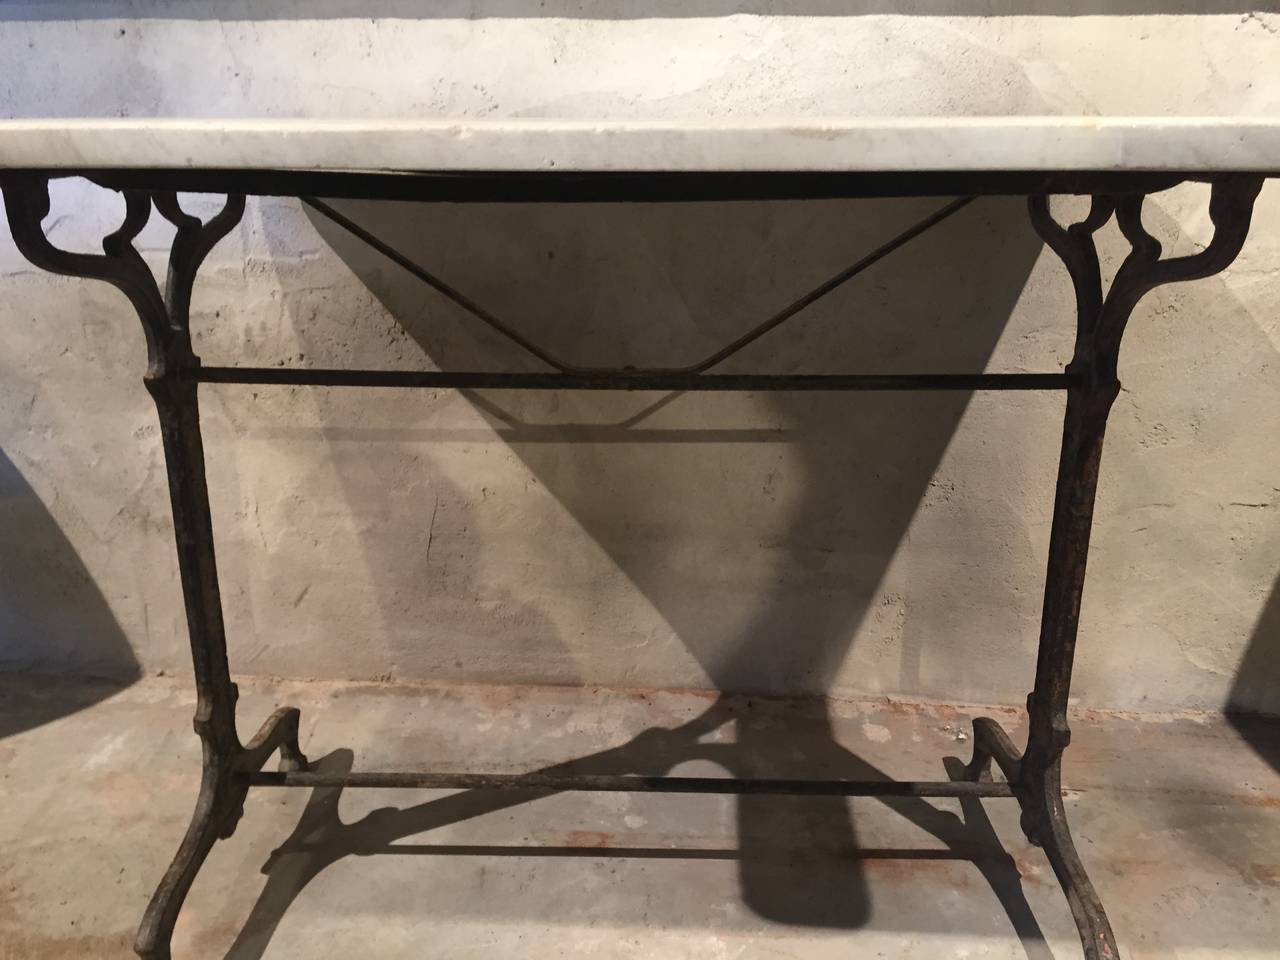 This classic Art Nouveau cast iron table features its original cream-colored marble top and is signed 